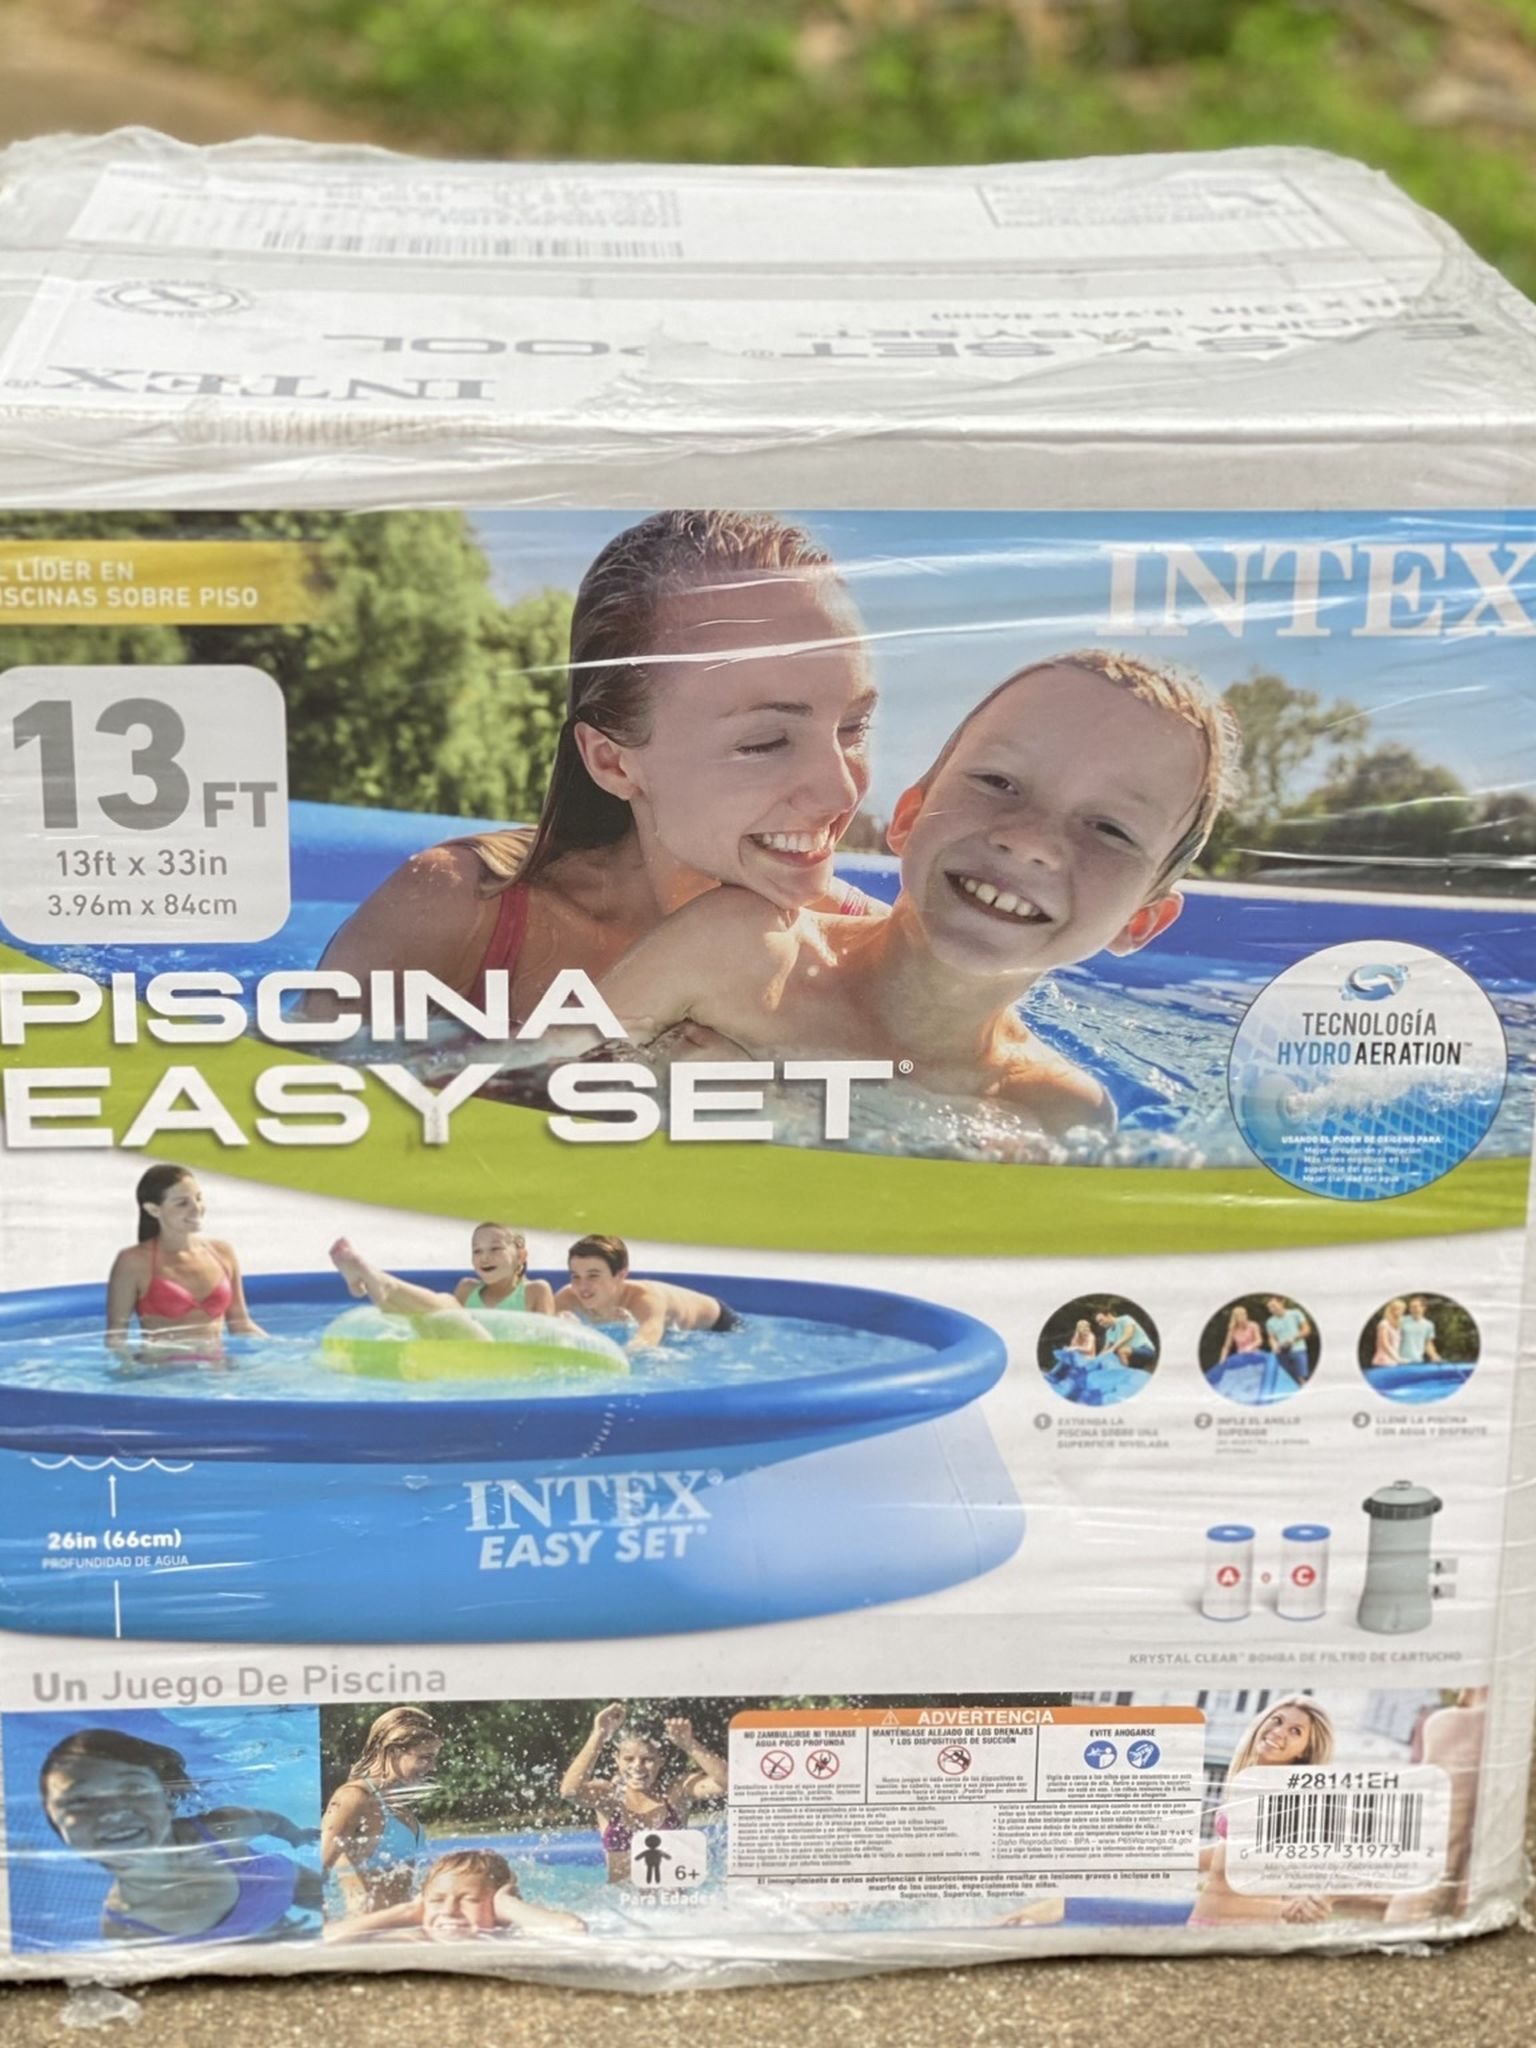 Intex Swimming Pool Piscina 13 ft x 33 in with Filter Pump Brand New